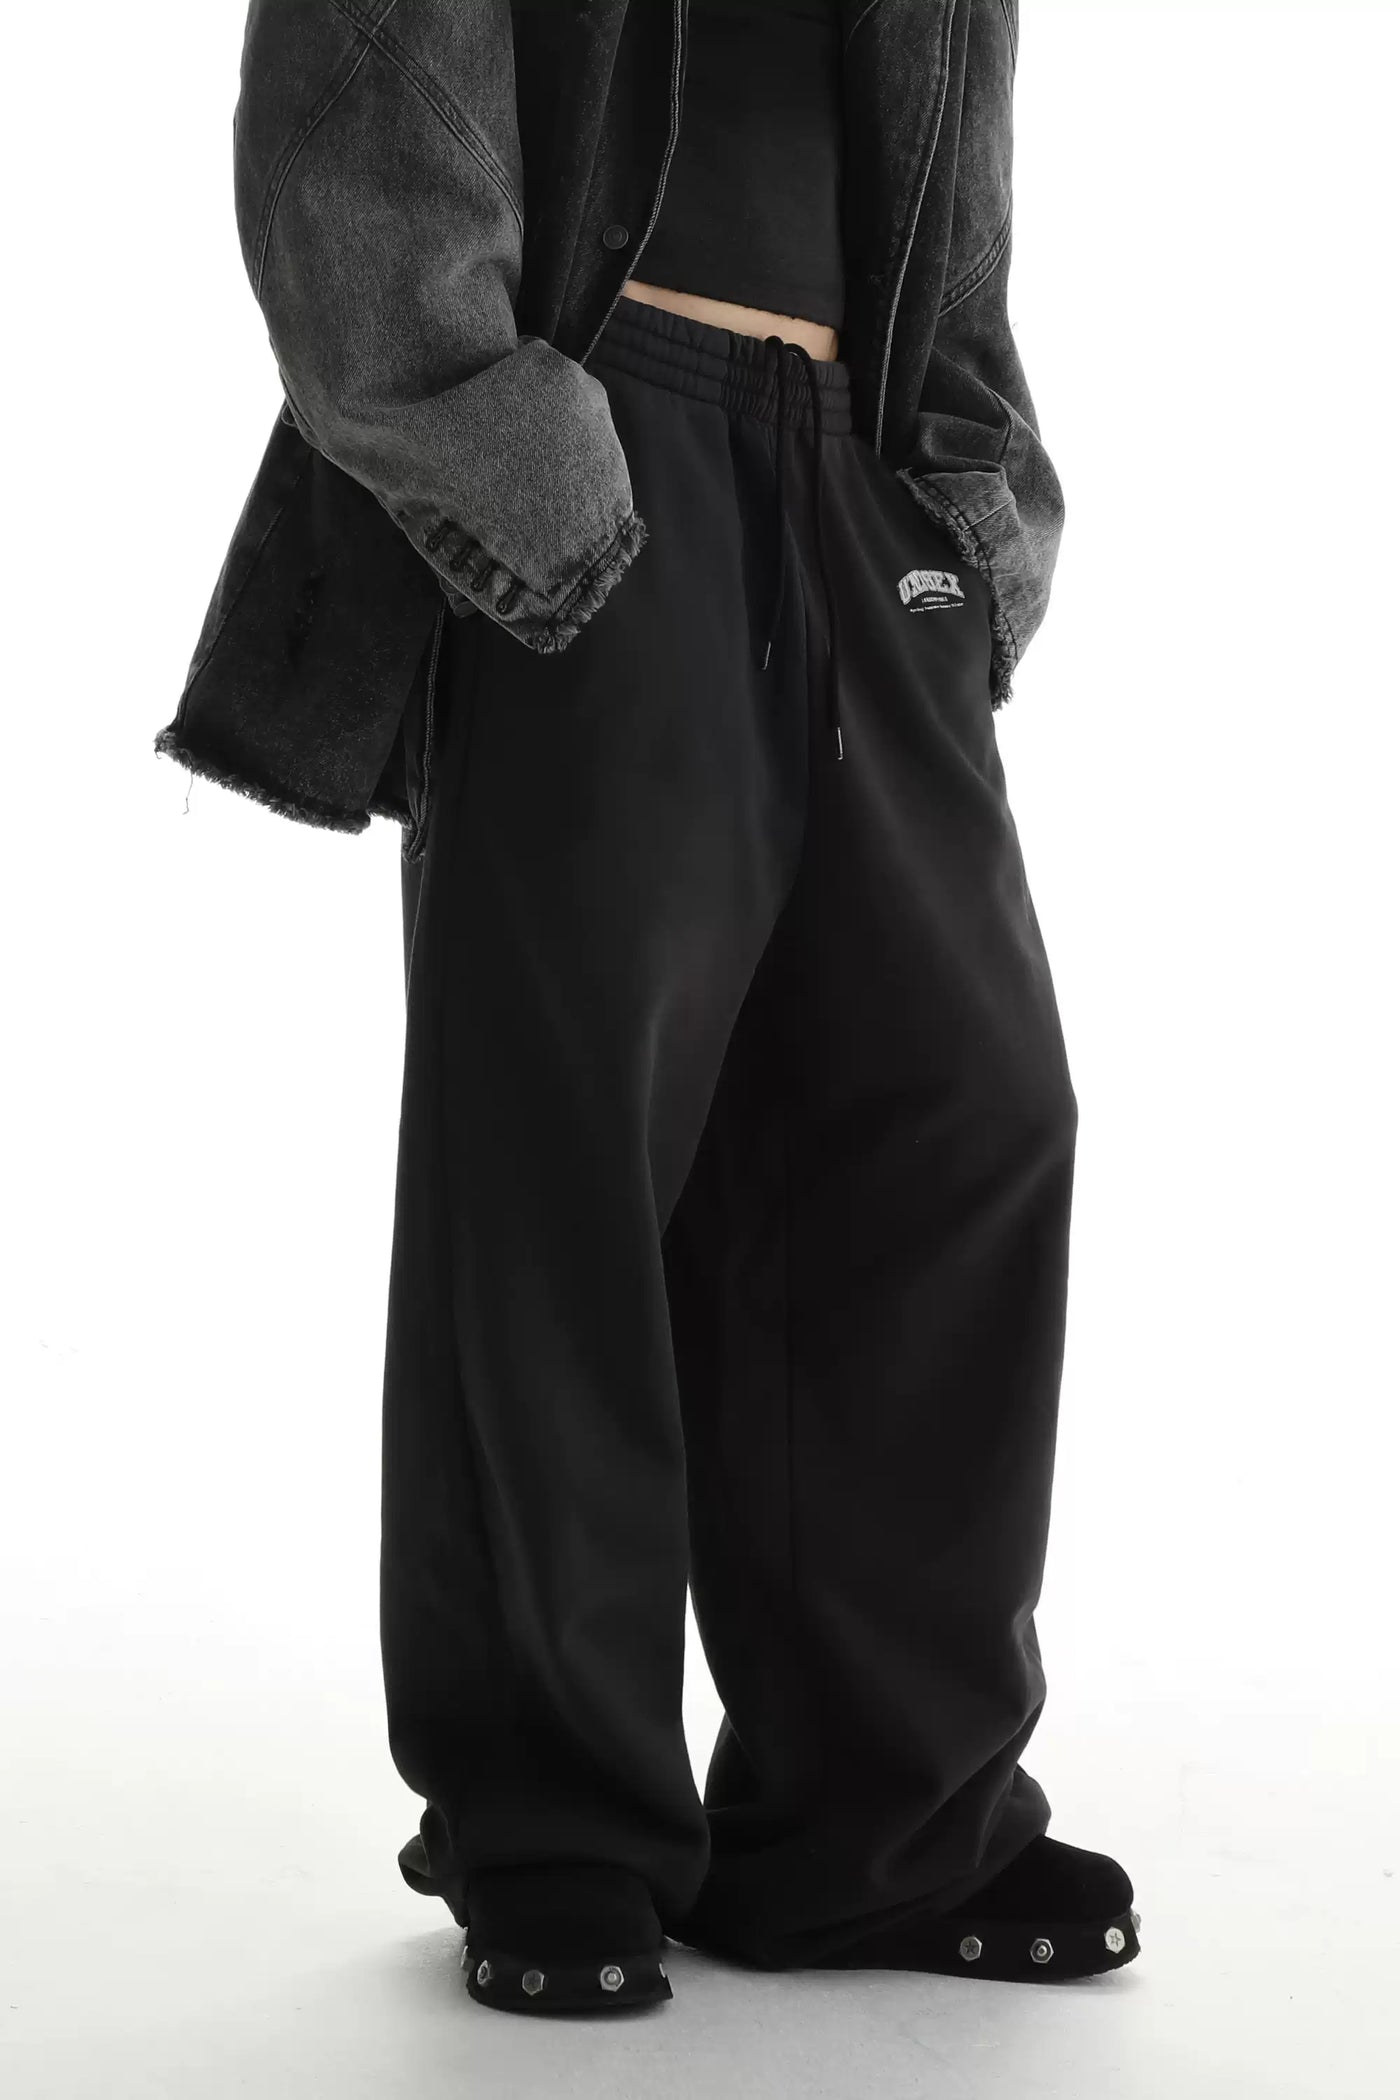 Faded and Gartered Sweatpants Korean Street Fashion Pants By Mason Prince Shop Online at OH Vault